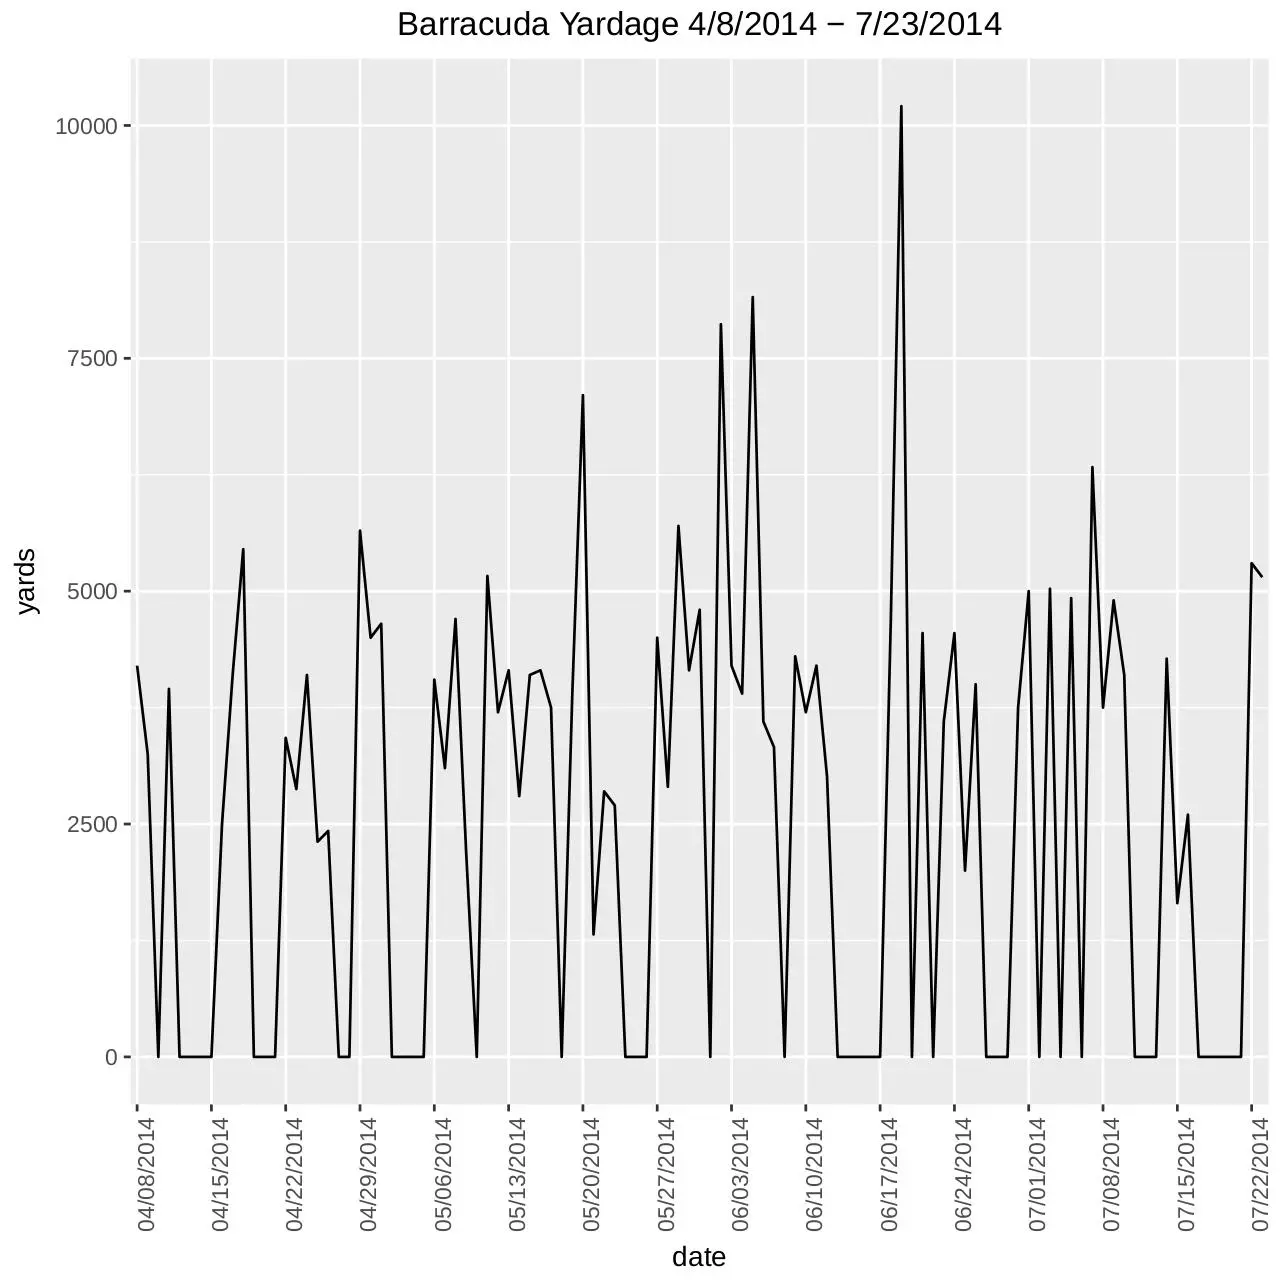 Document preview - barracuda_yardage_to_whole_period (copy).pdf - Page 1/1